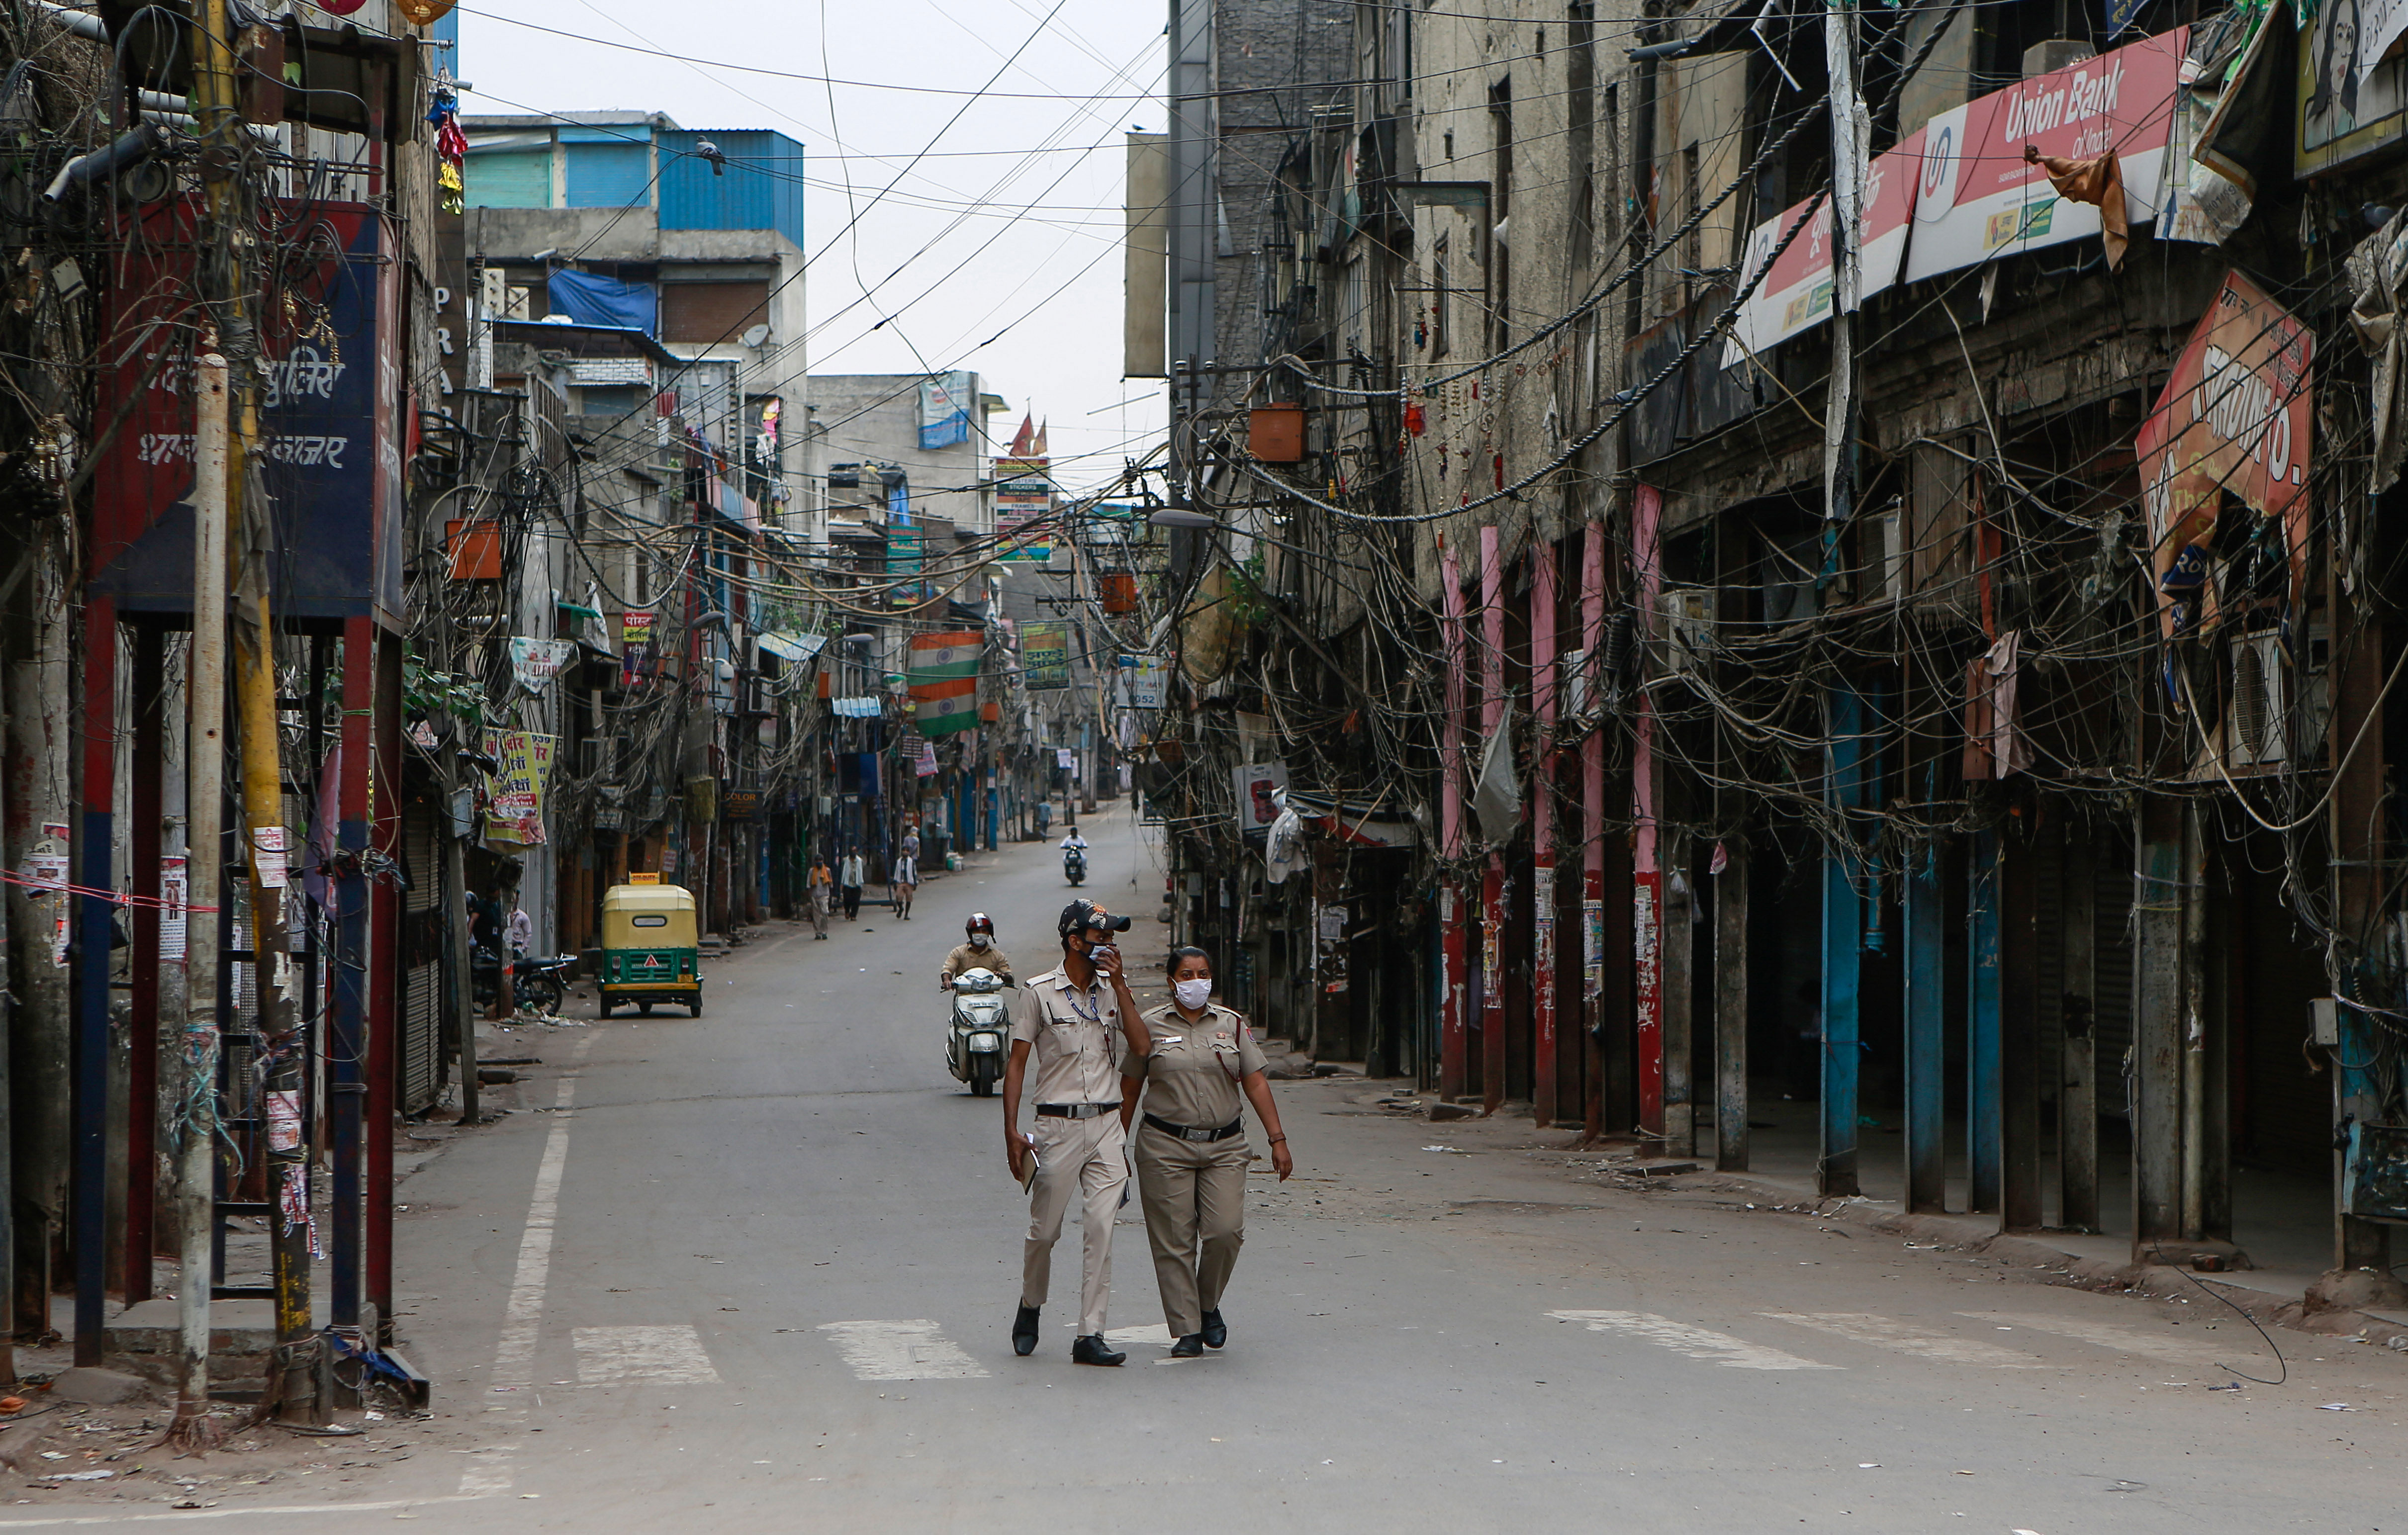 Police officers patrol a street with closed shops during a lockdown in New Delhi on April 20.